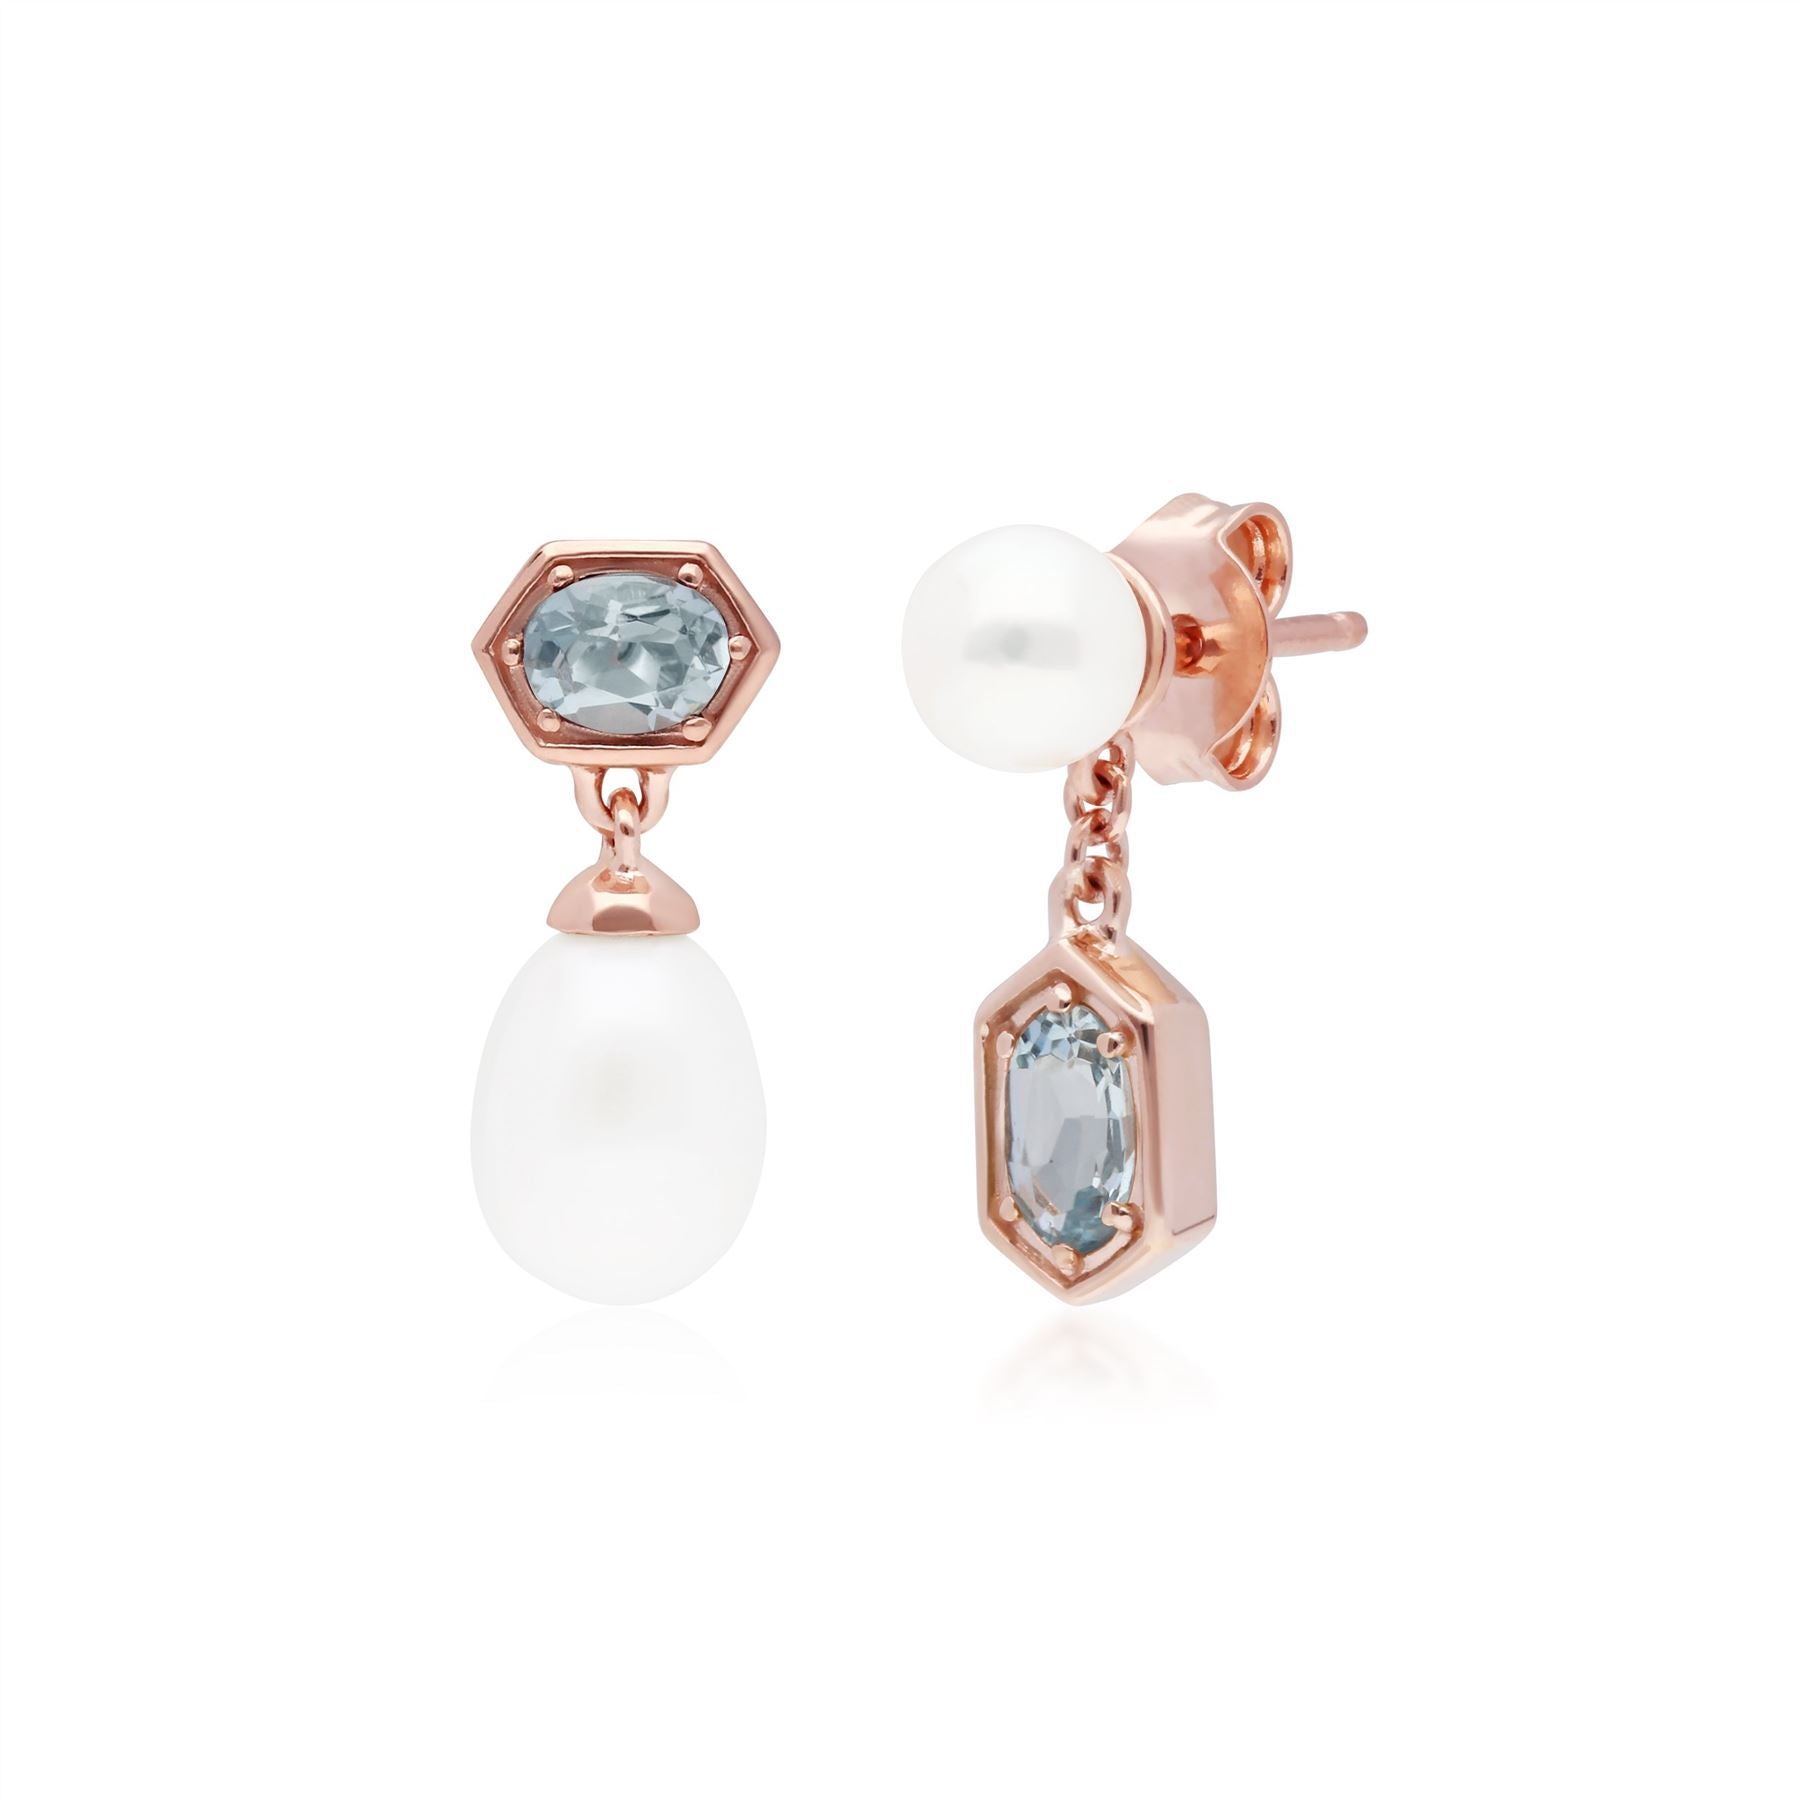 Modern Pearl & Aquamarine Mismatched Drop Earrings in Rose Gold Plated Sterling Silver